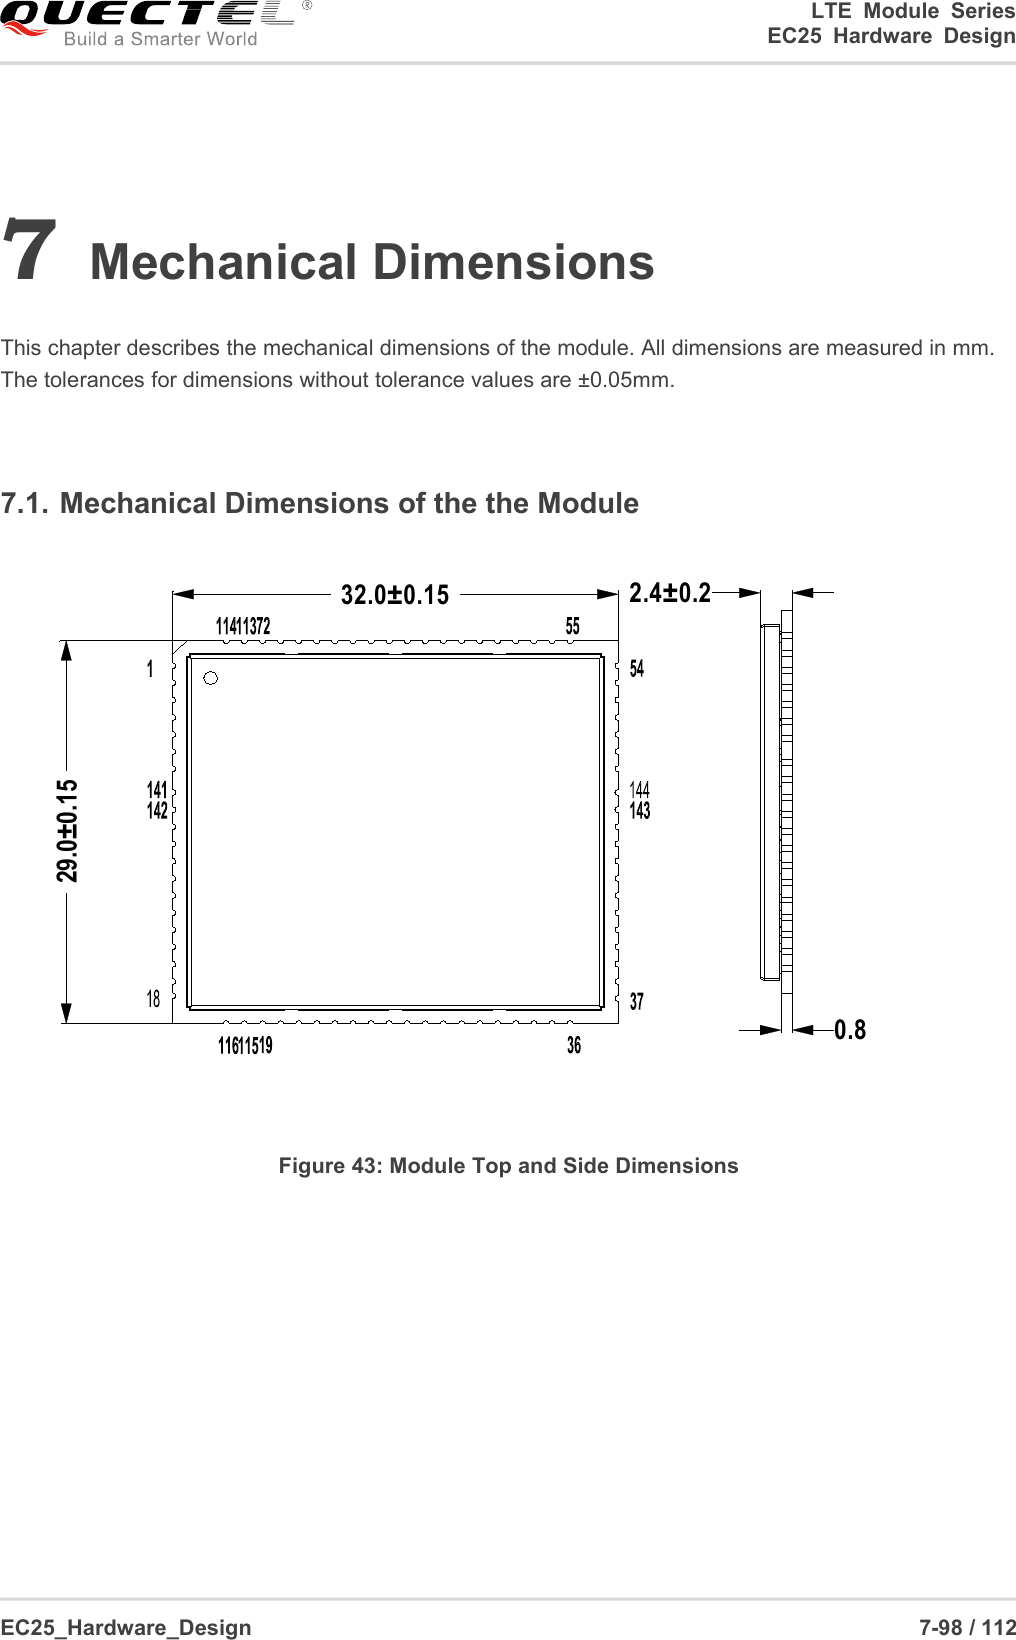 LTE Module SeriesEC25 Hardware DesignEC25_Hardware_Design 7-98 / 1127Mechanical DimensionsThis chapter describes the mechanical dimensions of the module. All dimensions are measured in mm.The tolerances for dimensions without tolerance values are ±0.05mm.7.1. Mechanical Dimensions of the the Module32.0±0.1529.0±0.150.82.4±0.2Figure 43: Module Top and Side Dimensions